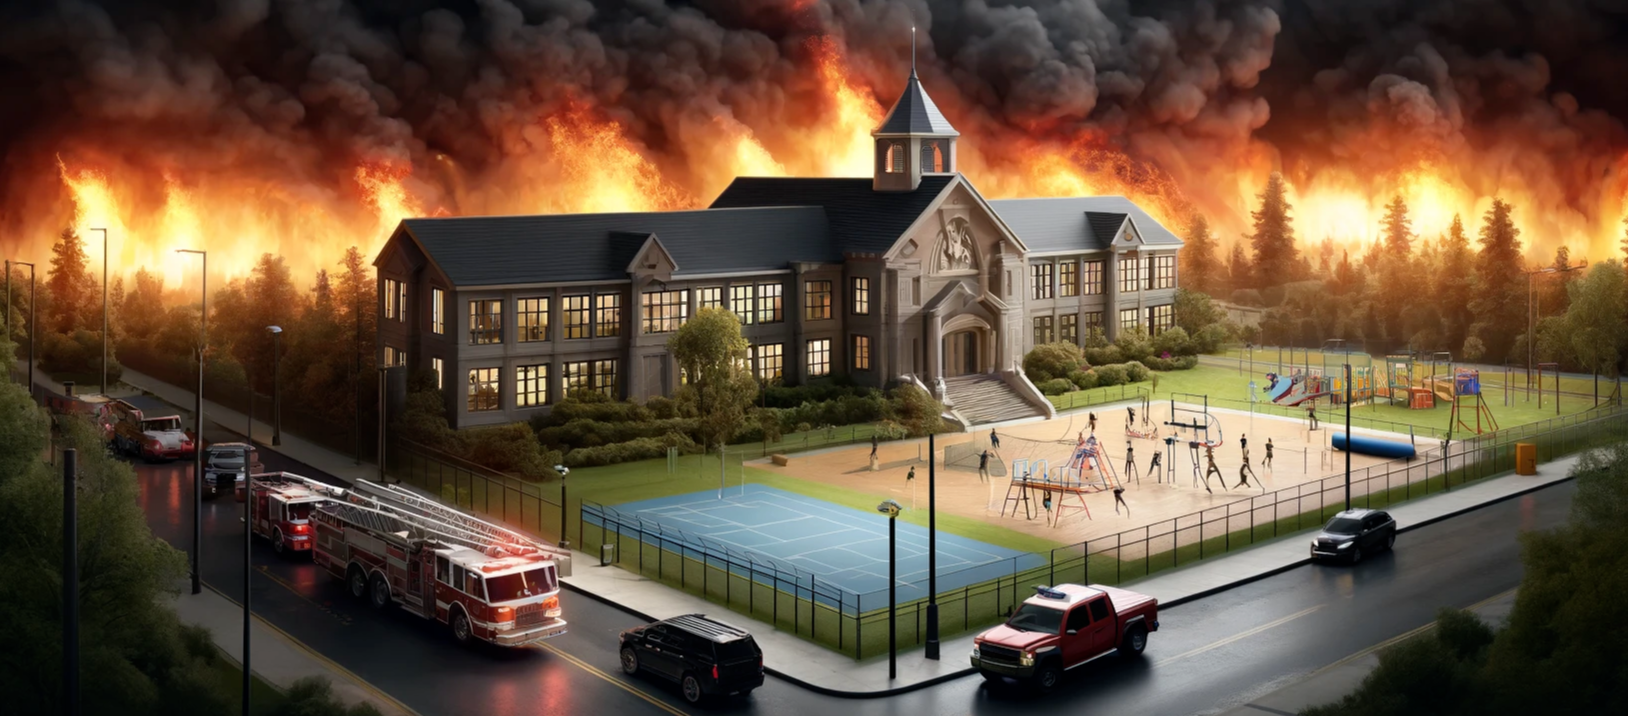 An A.I. generated image of a school with a wildfire approaching. On the street are multiple fire vehicles. There are kids standing or playing on the playground in the front of the school.